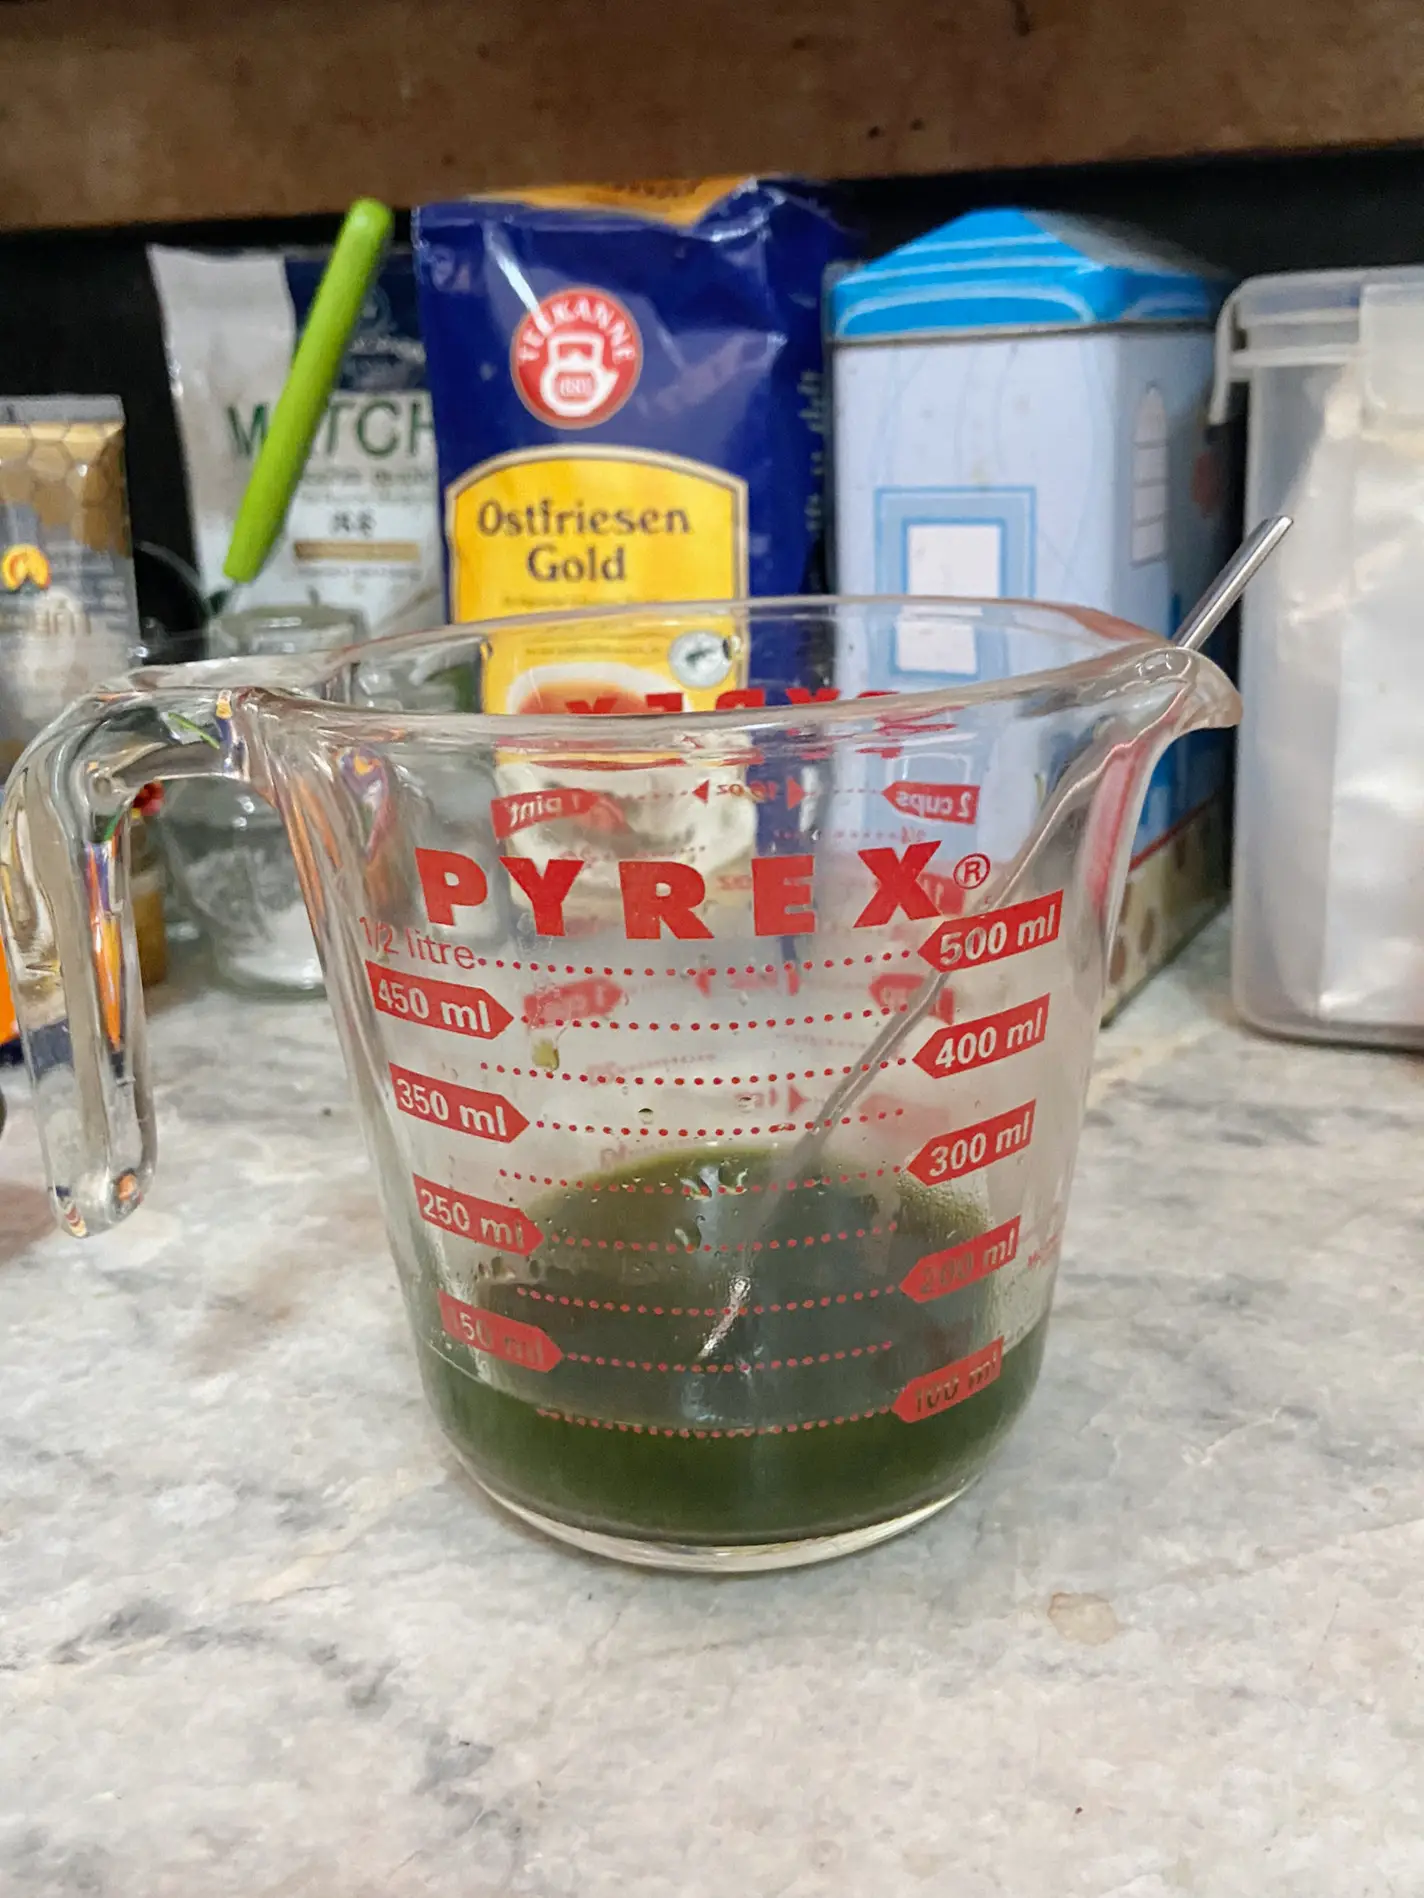 Pyrex Covered Measuring Cup, 8 c - Kroger